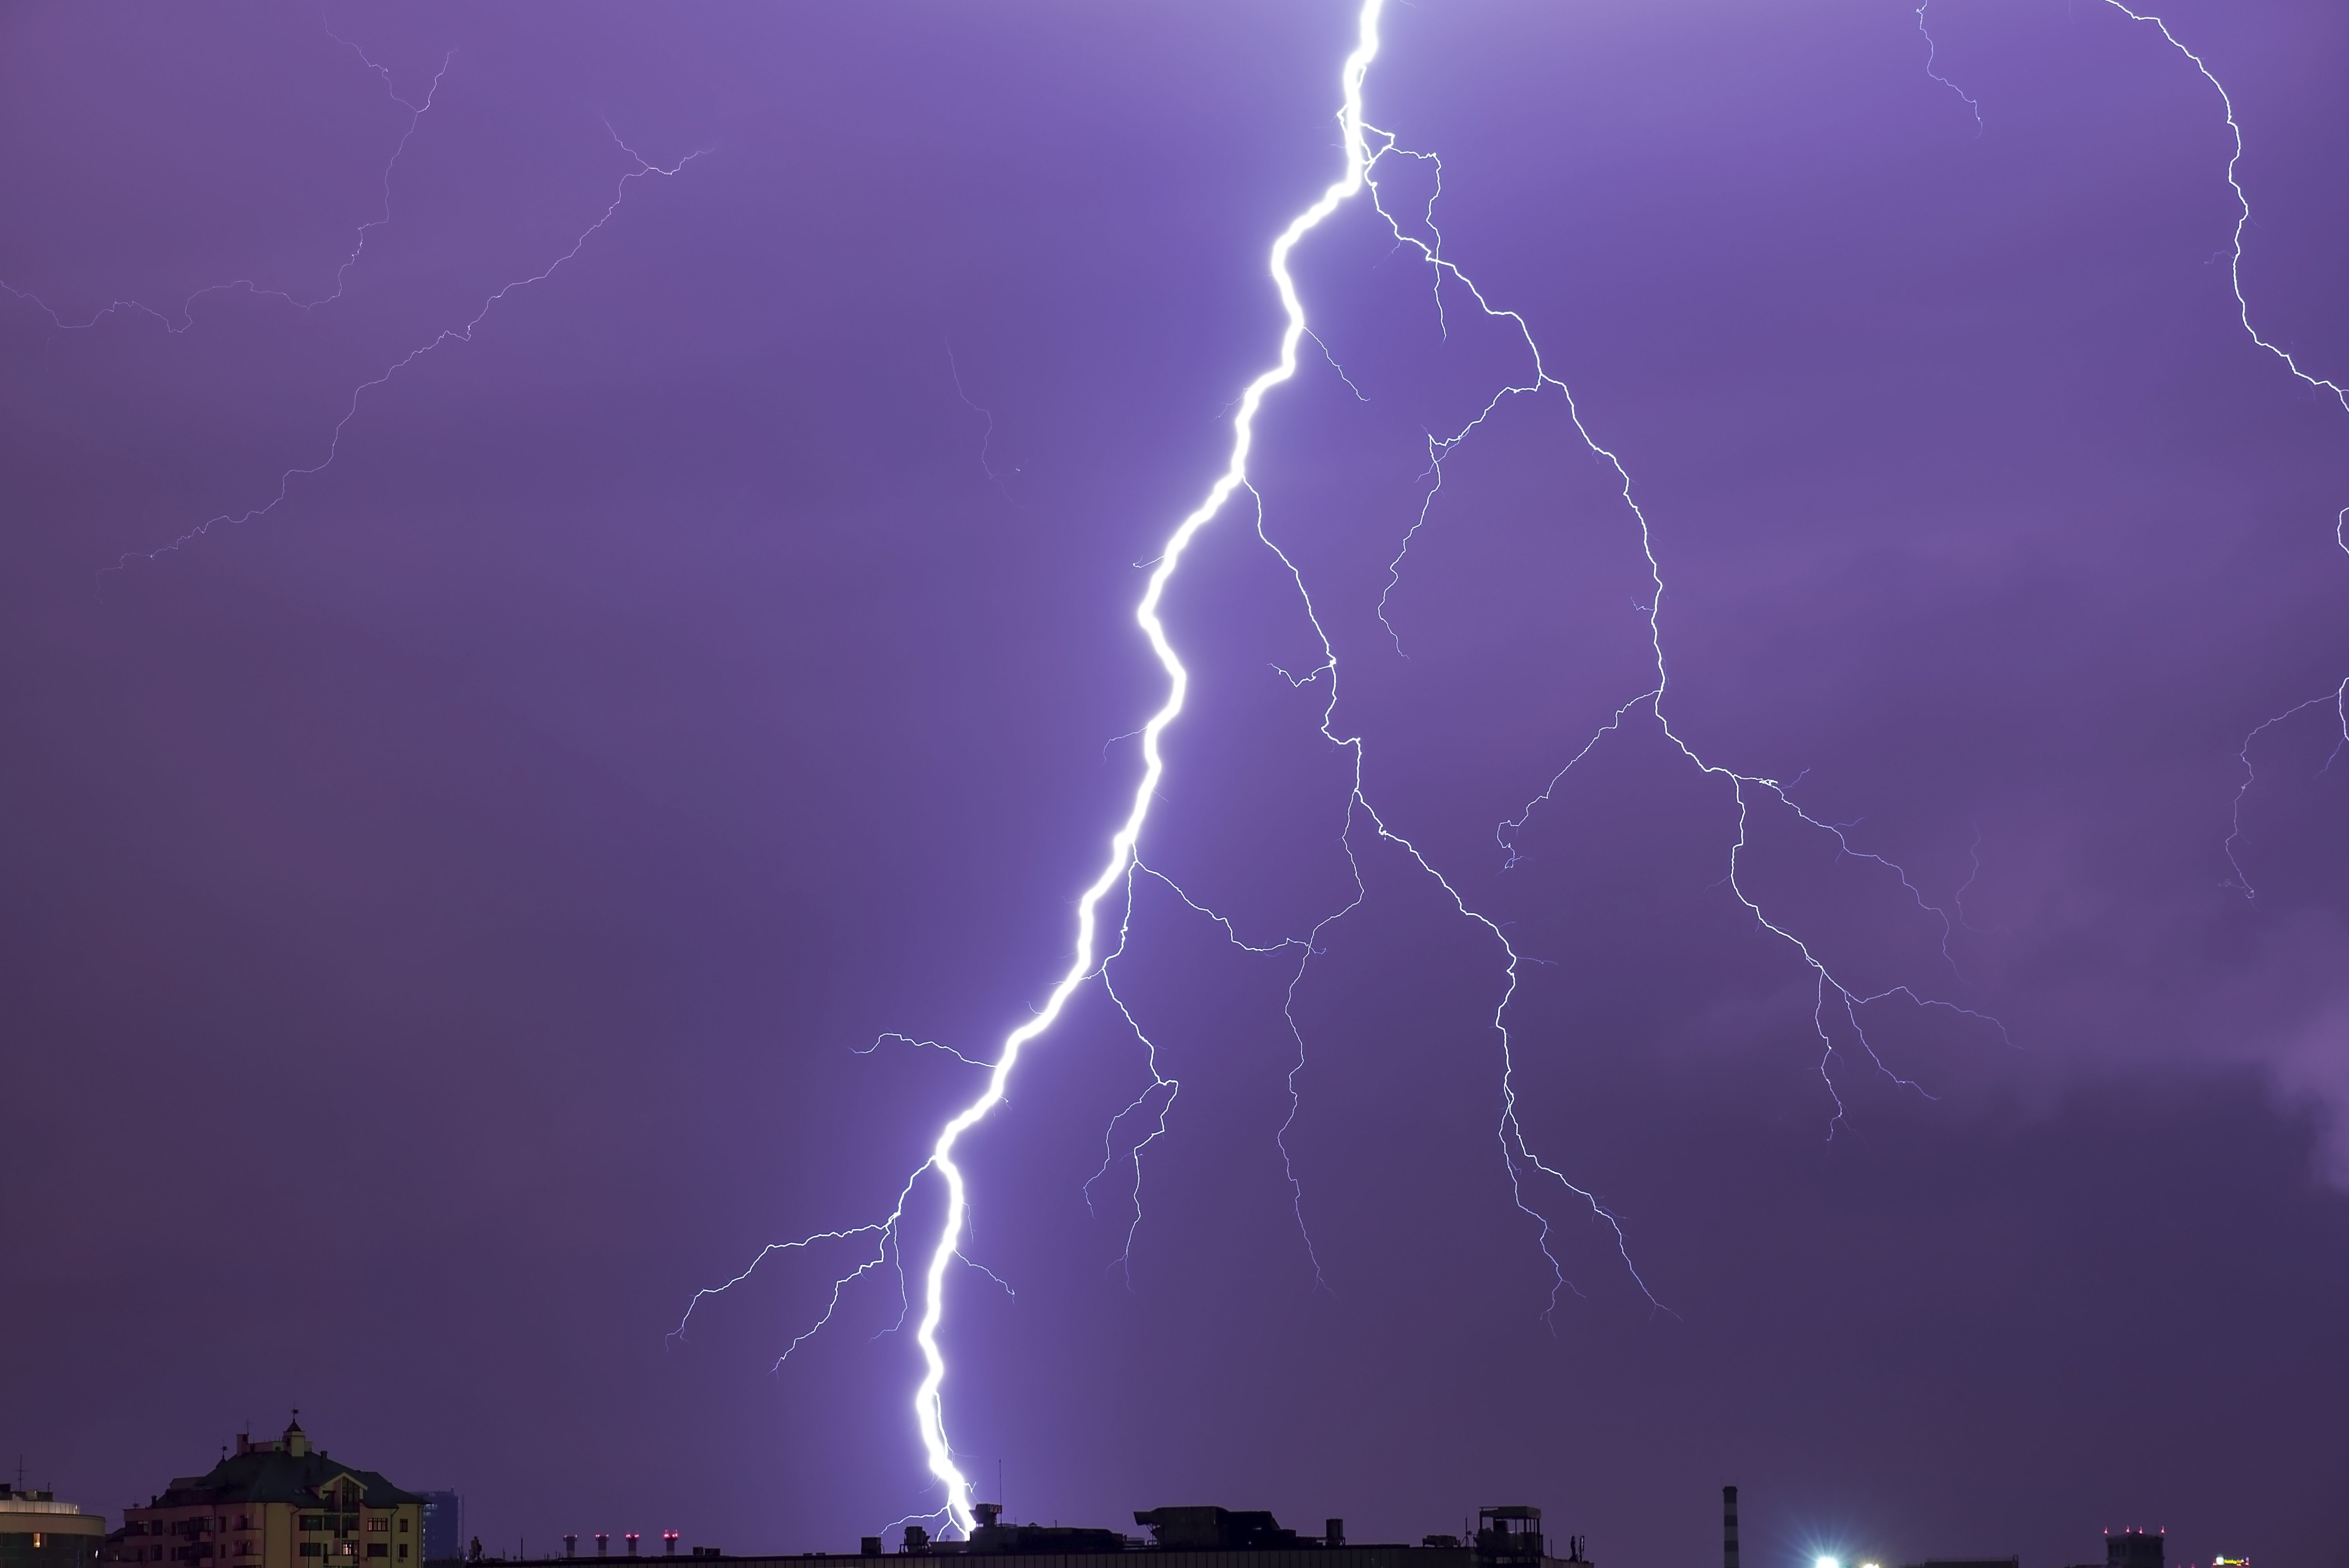 Lightning Injuries: Causes, Prevention, and How to Help Victims